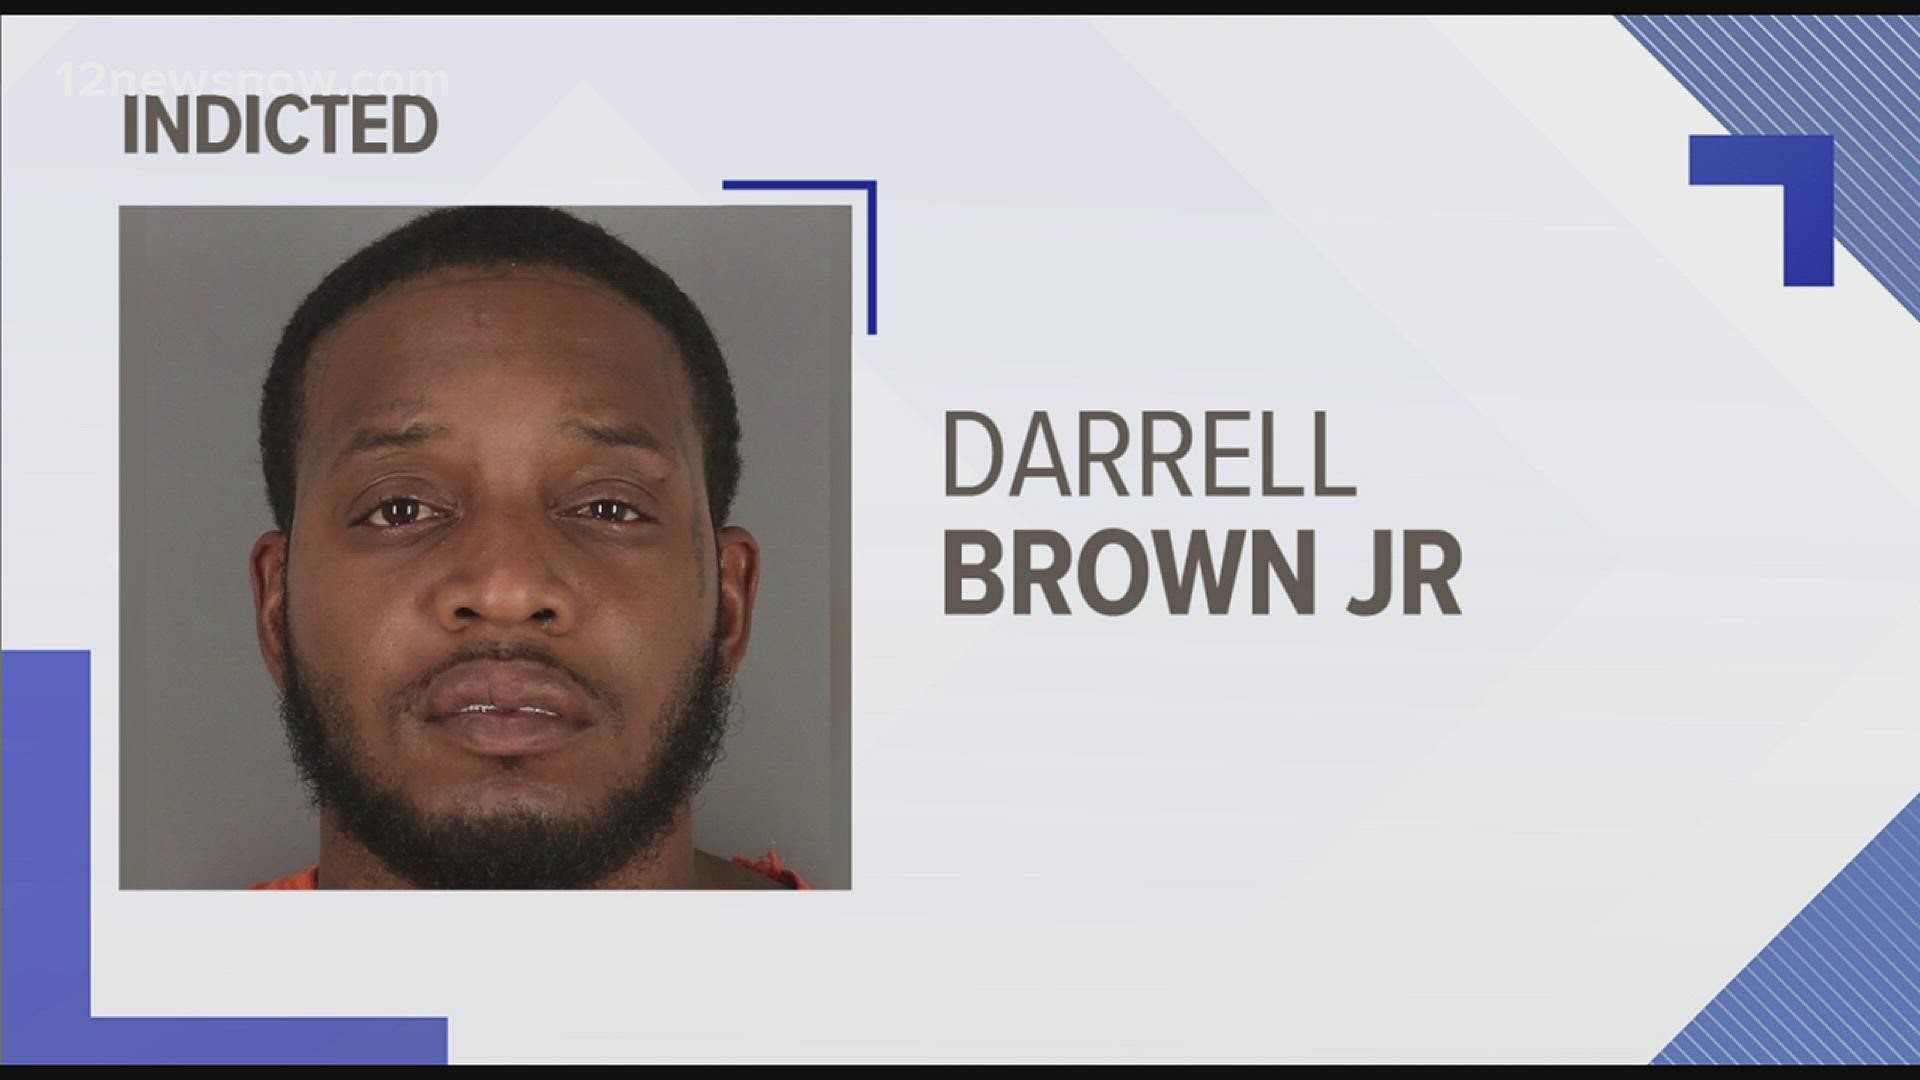 Darrell Brown Jr., 39, is currently in the Jefferson County Jail on a $100,000 bond.